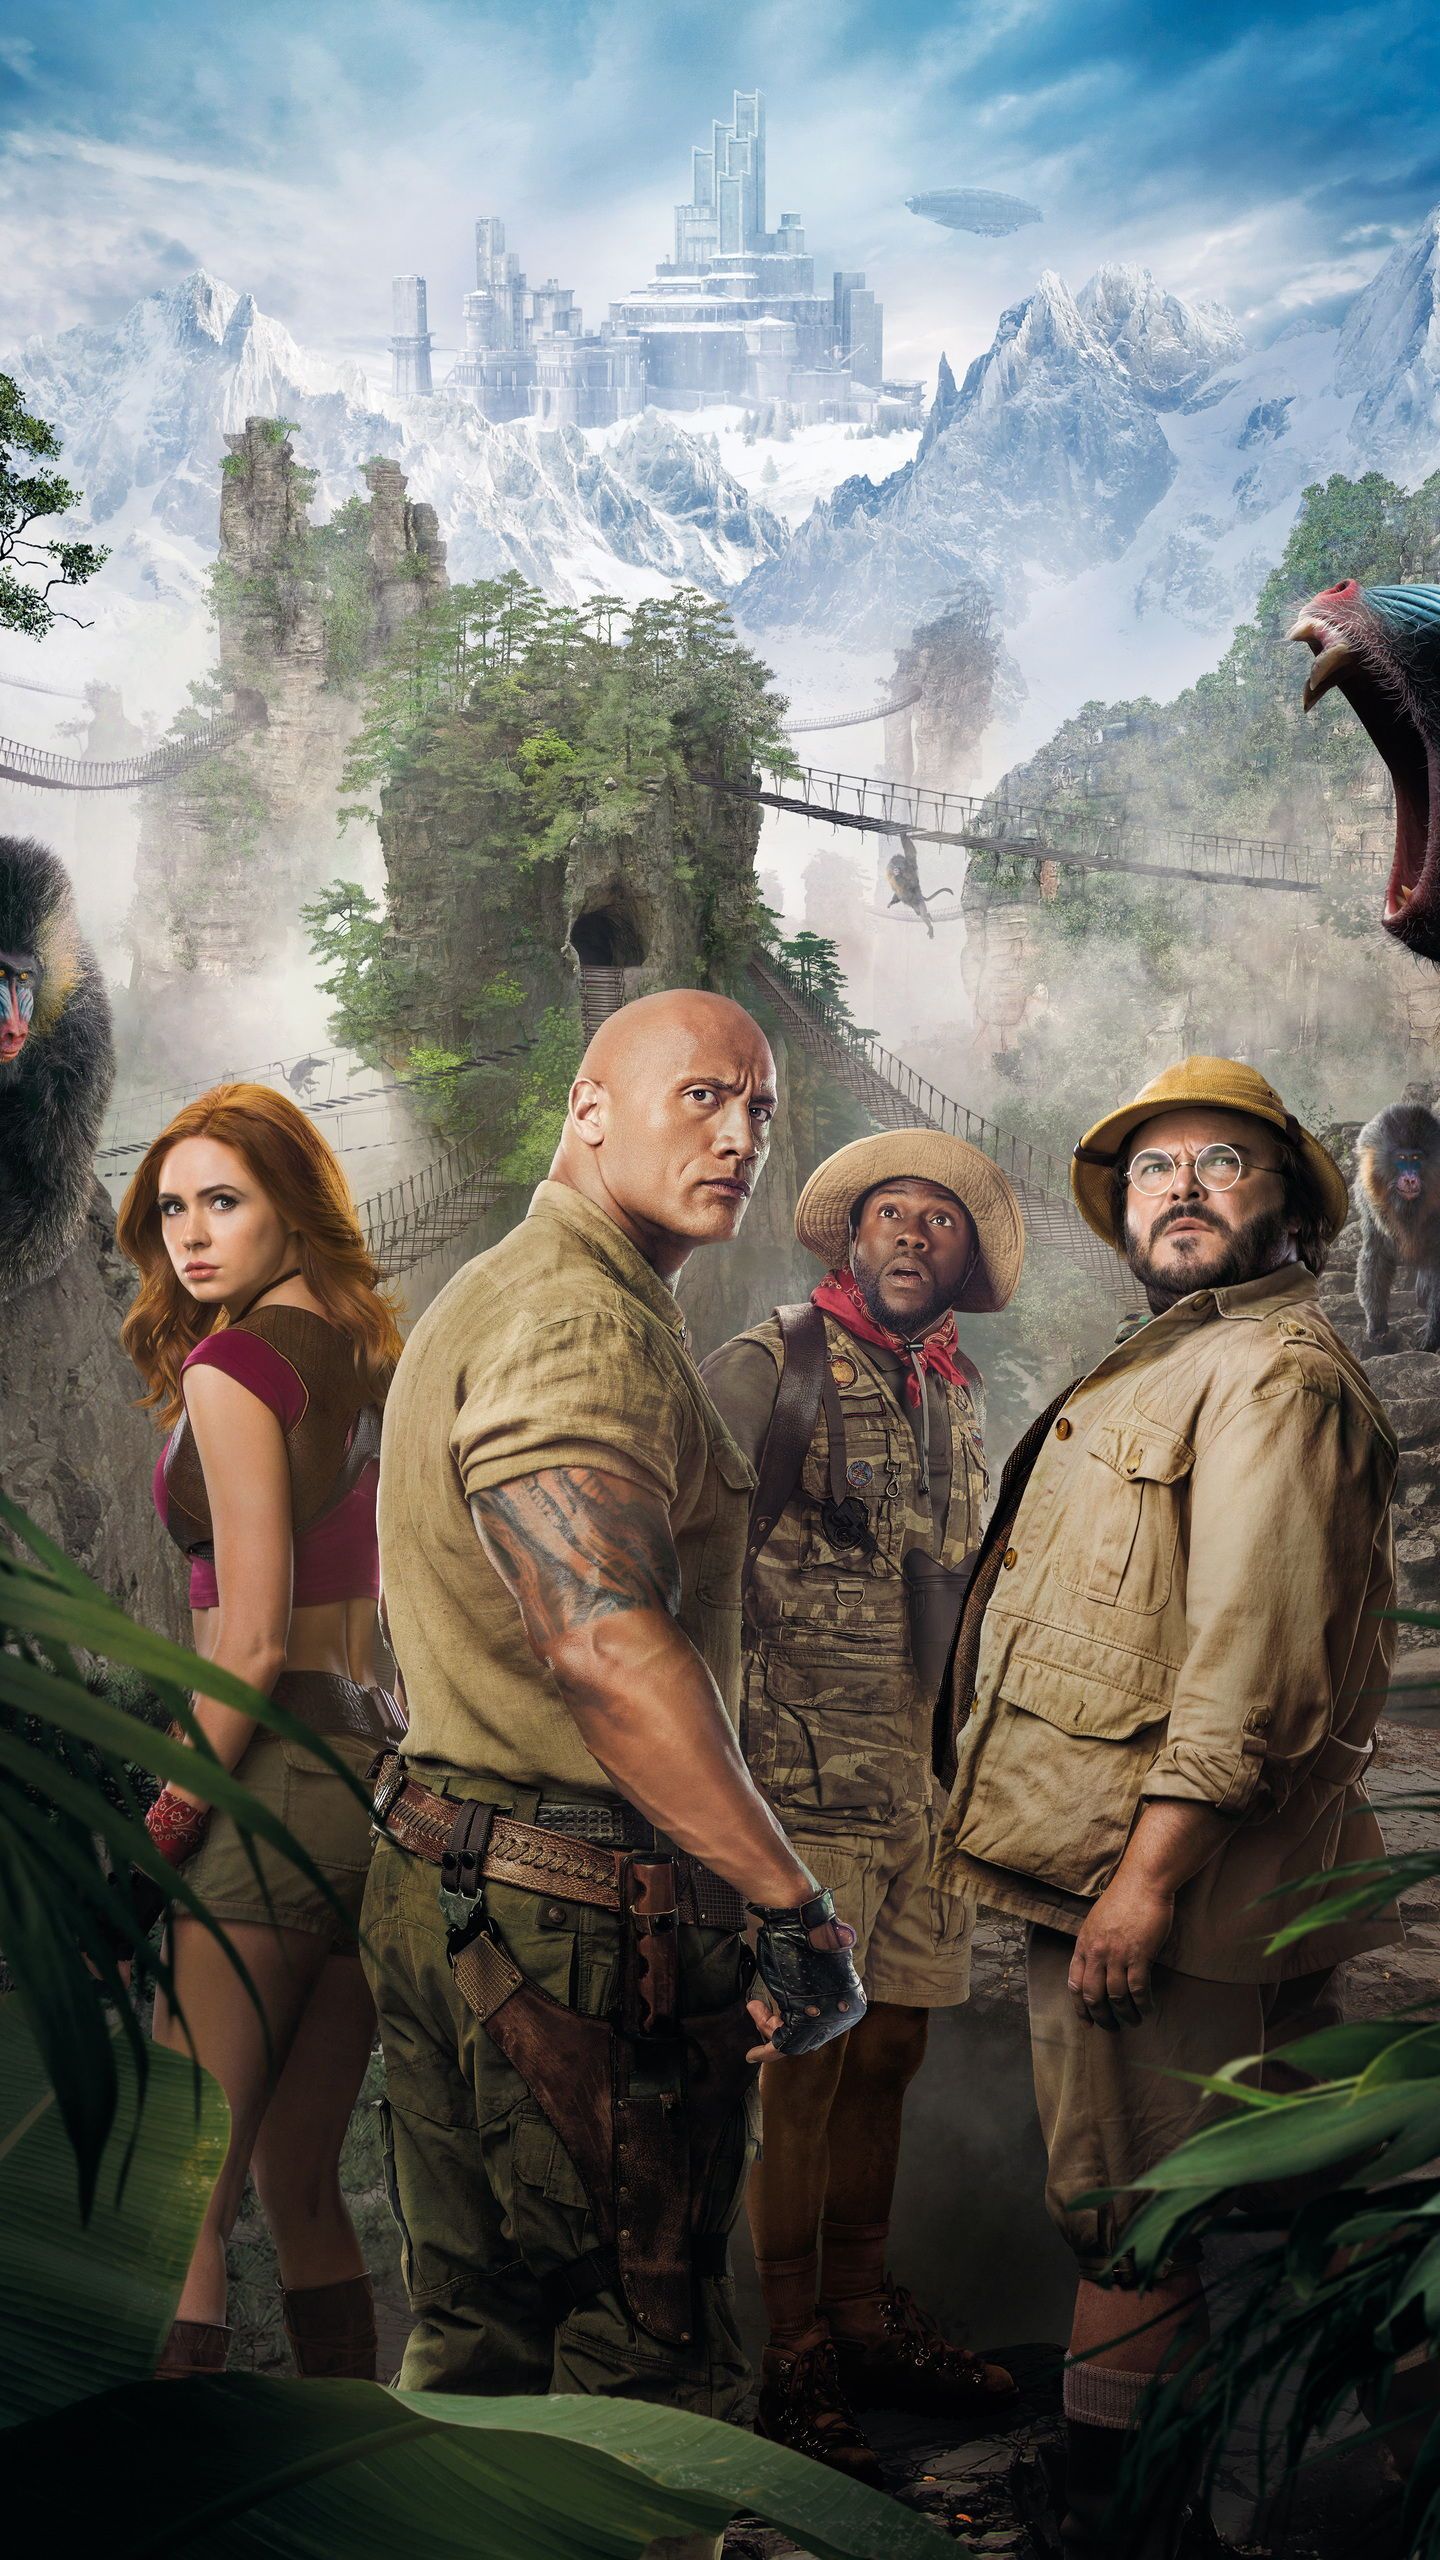 Read this to know if the movie is the movie good?. #Jumanji